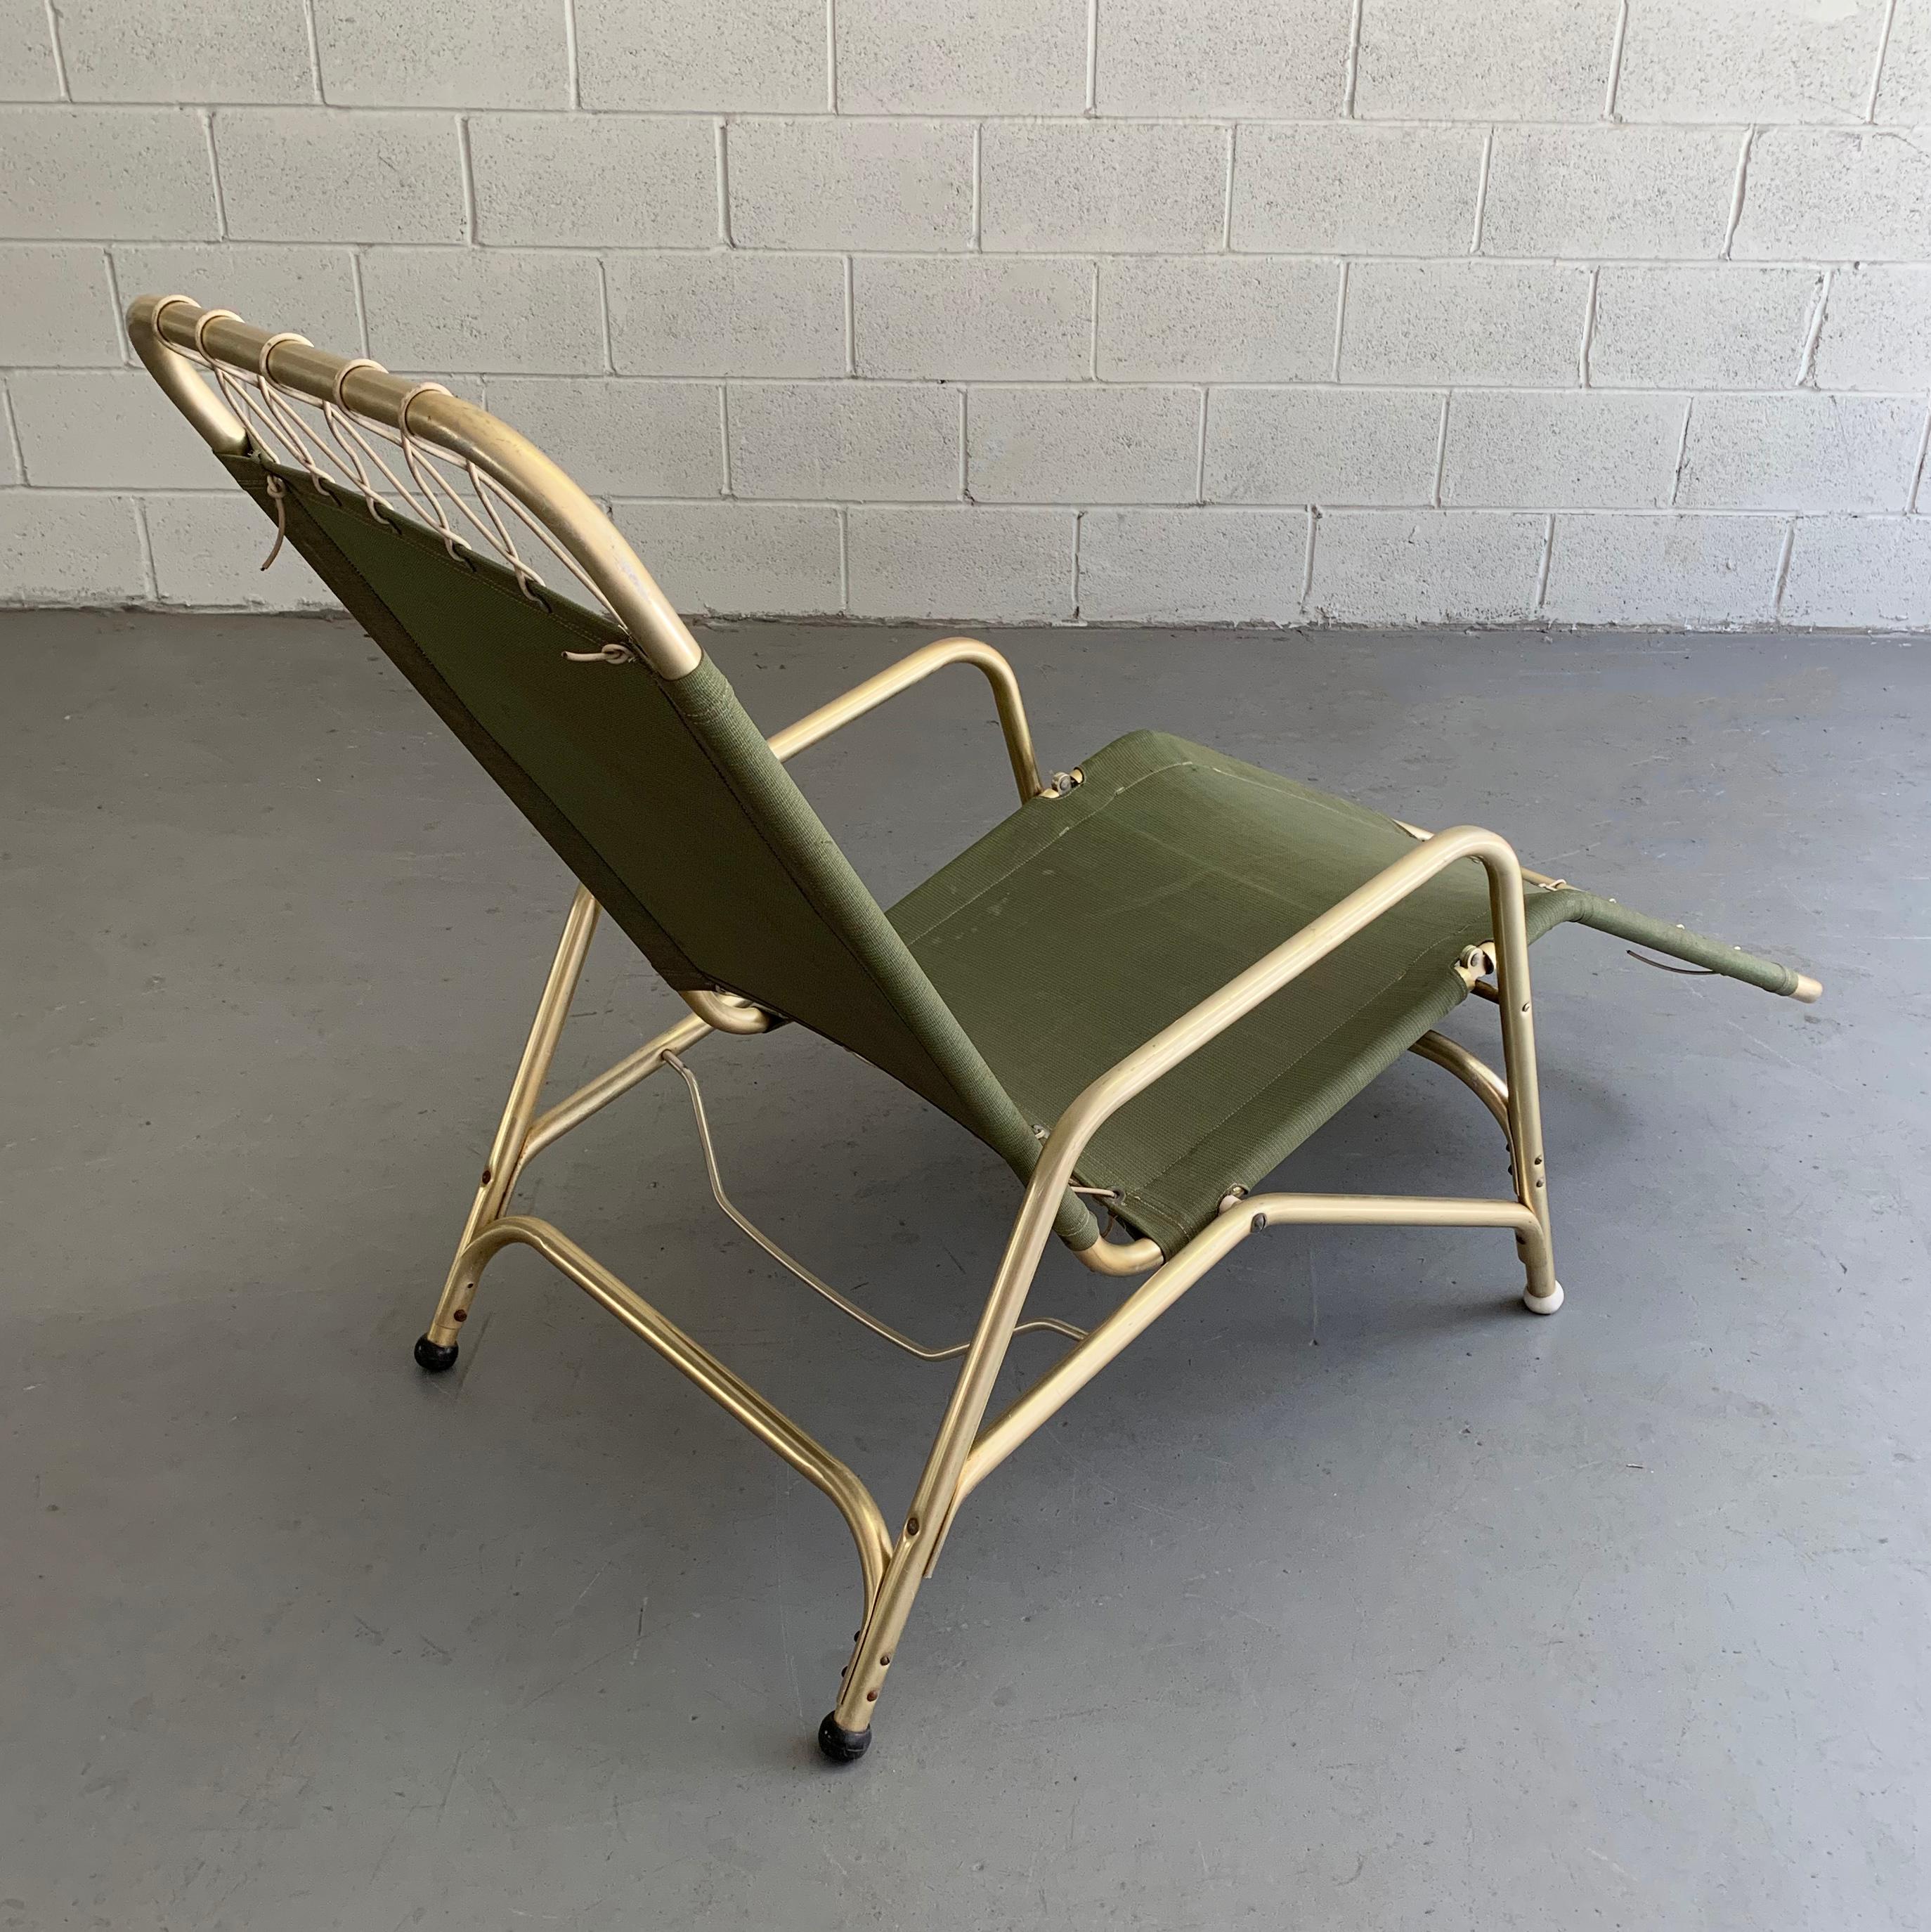 American Art Deco Folding Aluminum Lounge Chair by The Troy Sunshade Company